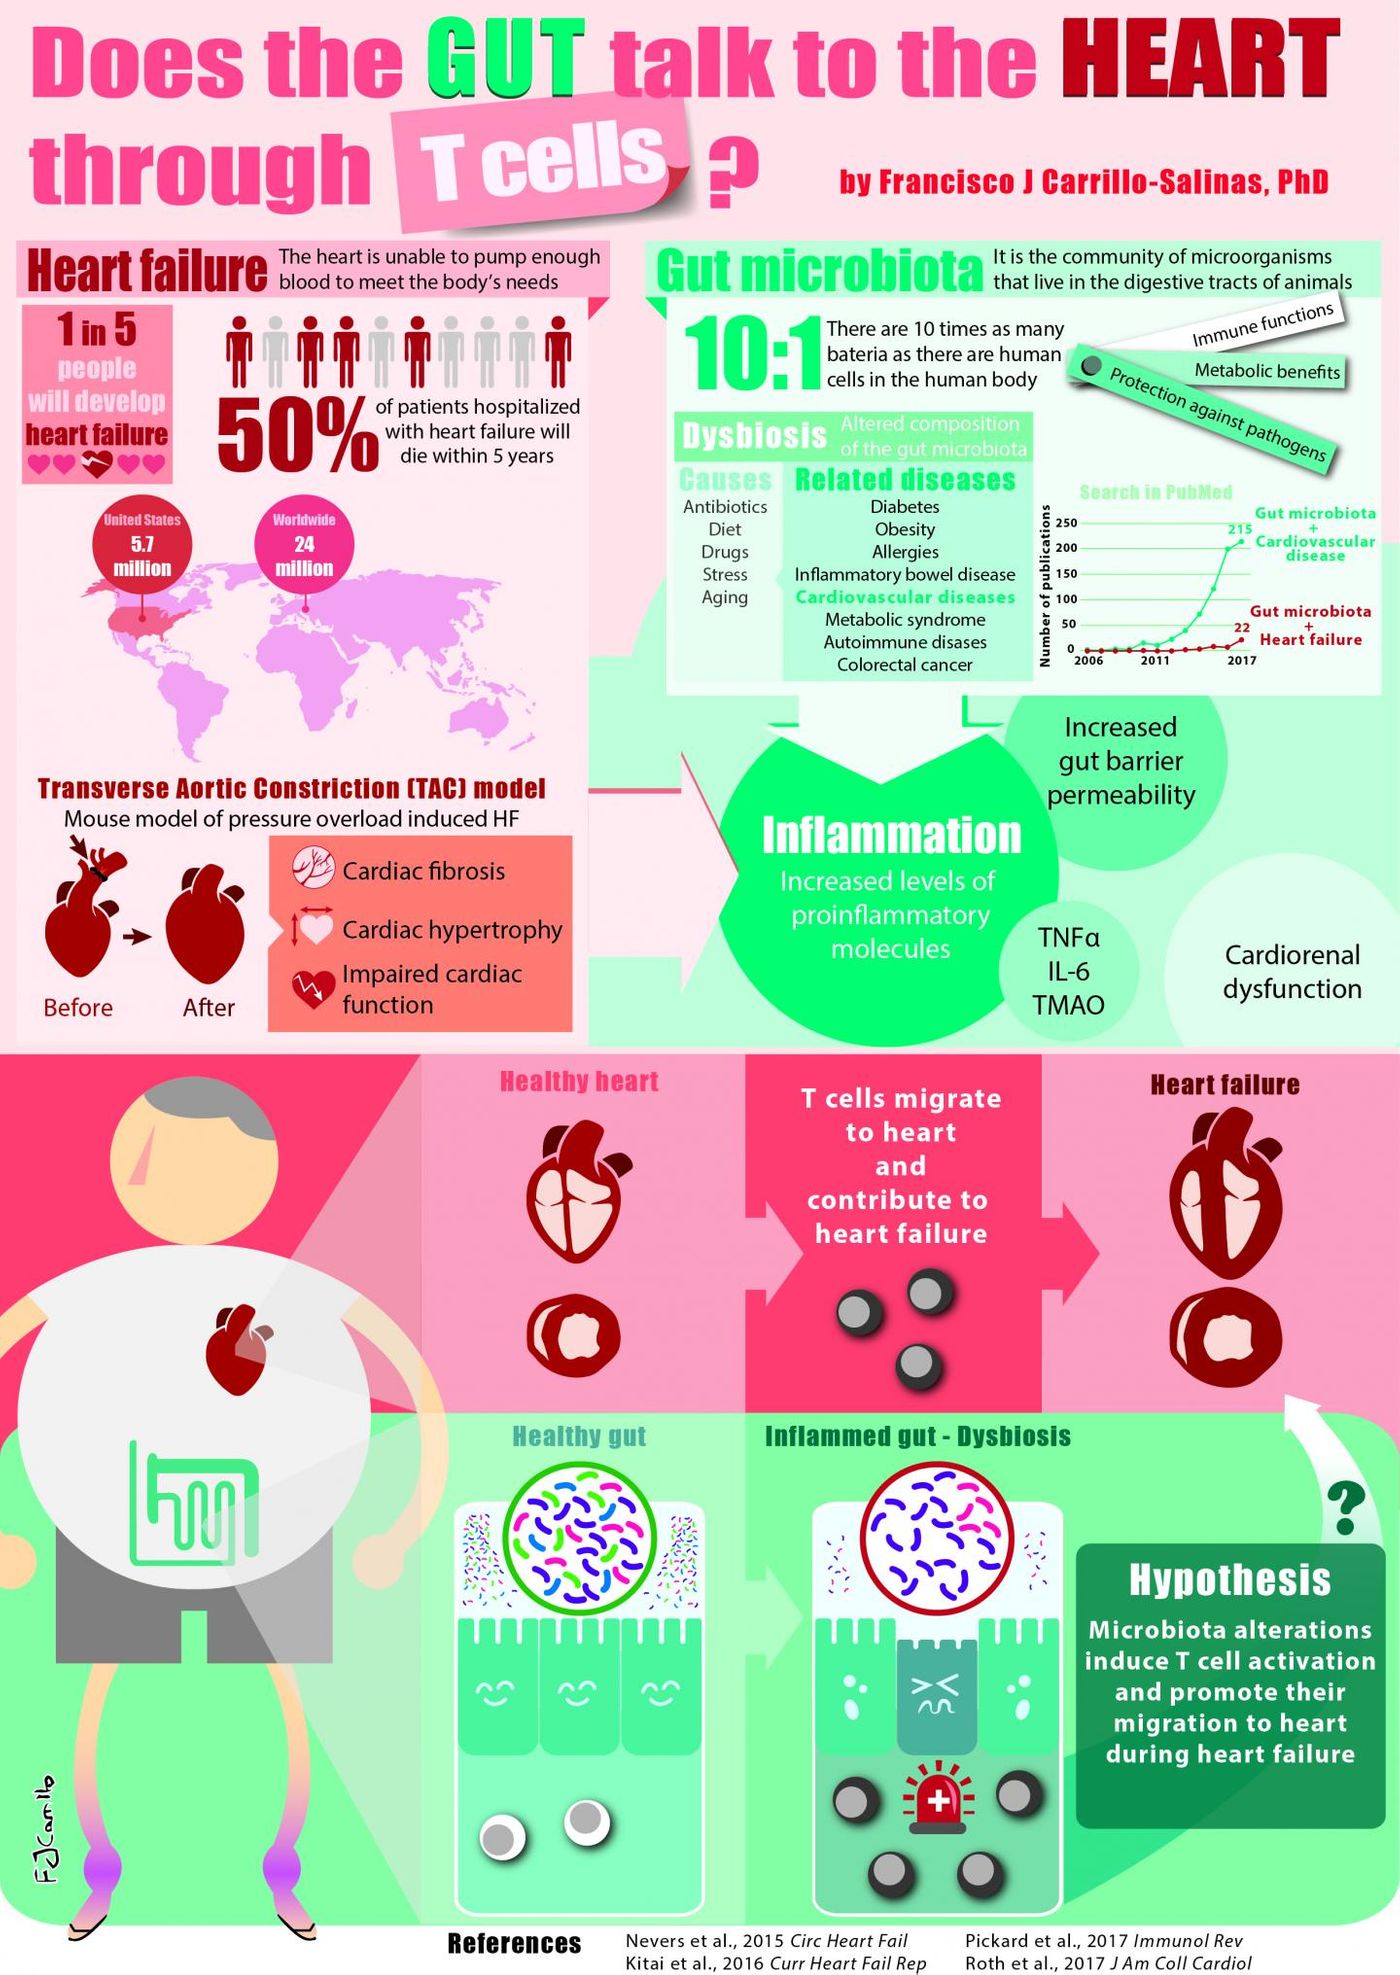 This is an infographic describing research on the communication between the gut and the heart. / Credit: Francisco Carrillo-Salinas, PhD